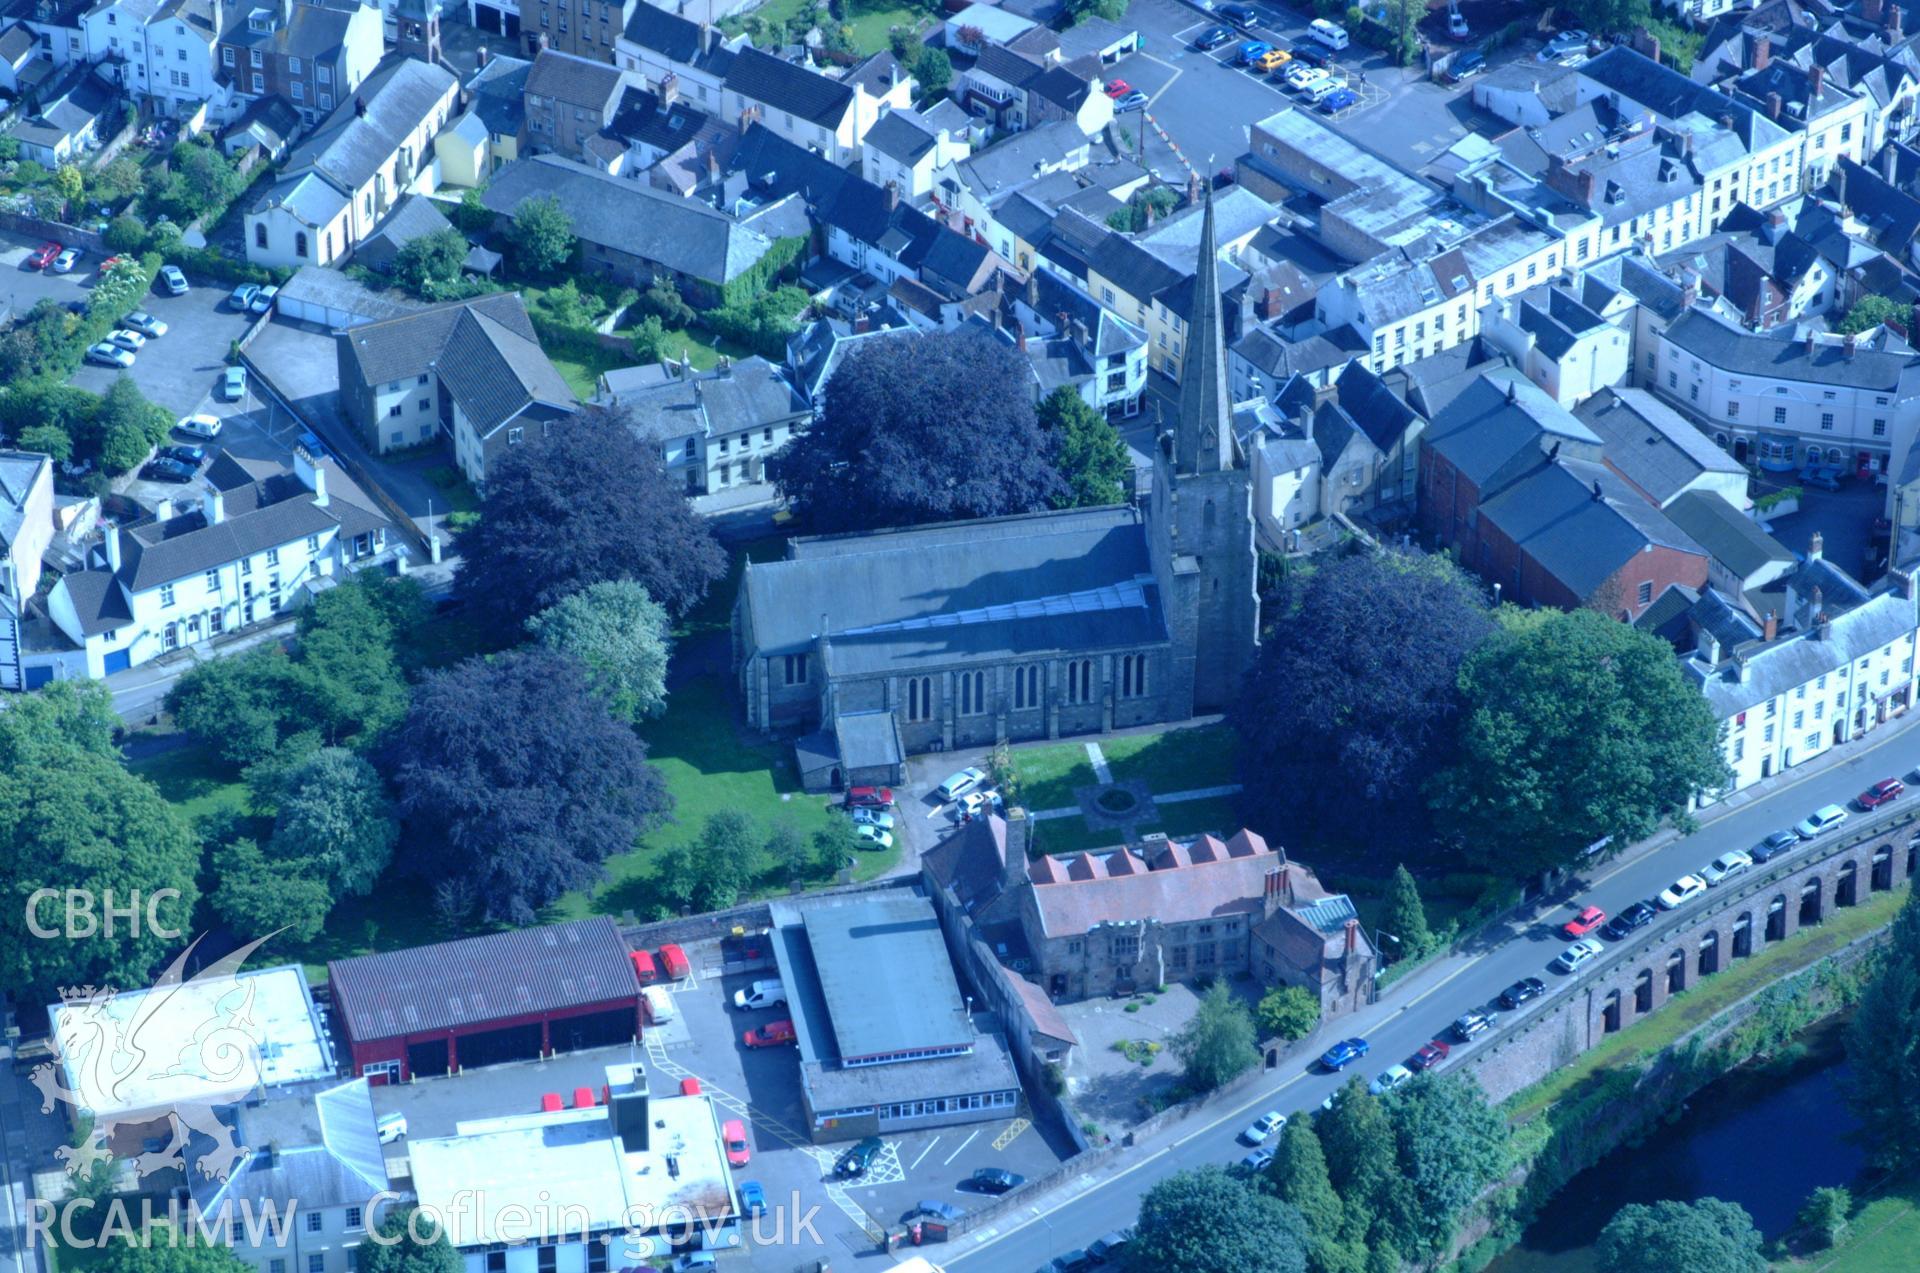 RCAHMW colour oblique aerial photograph of St Mary the Virgin, Whitecross street, Monmouth, taken on 02/06/2004 by Toby Driver